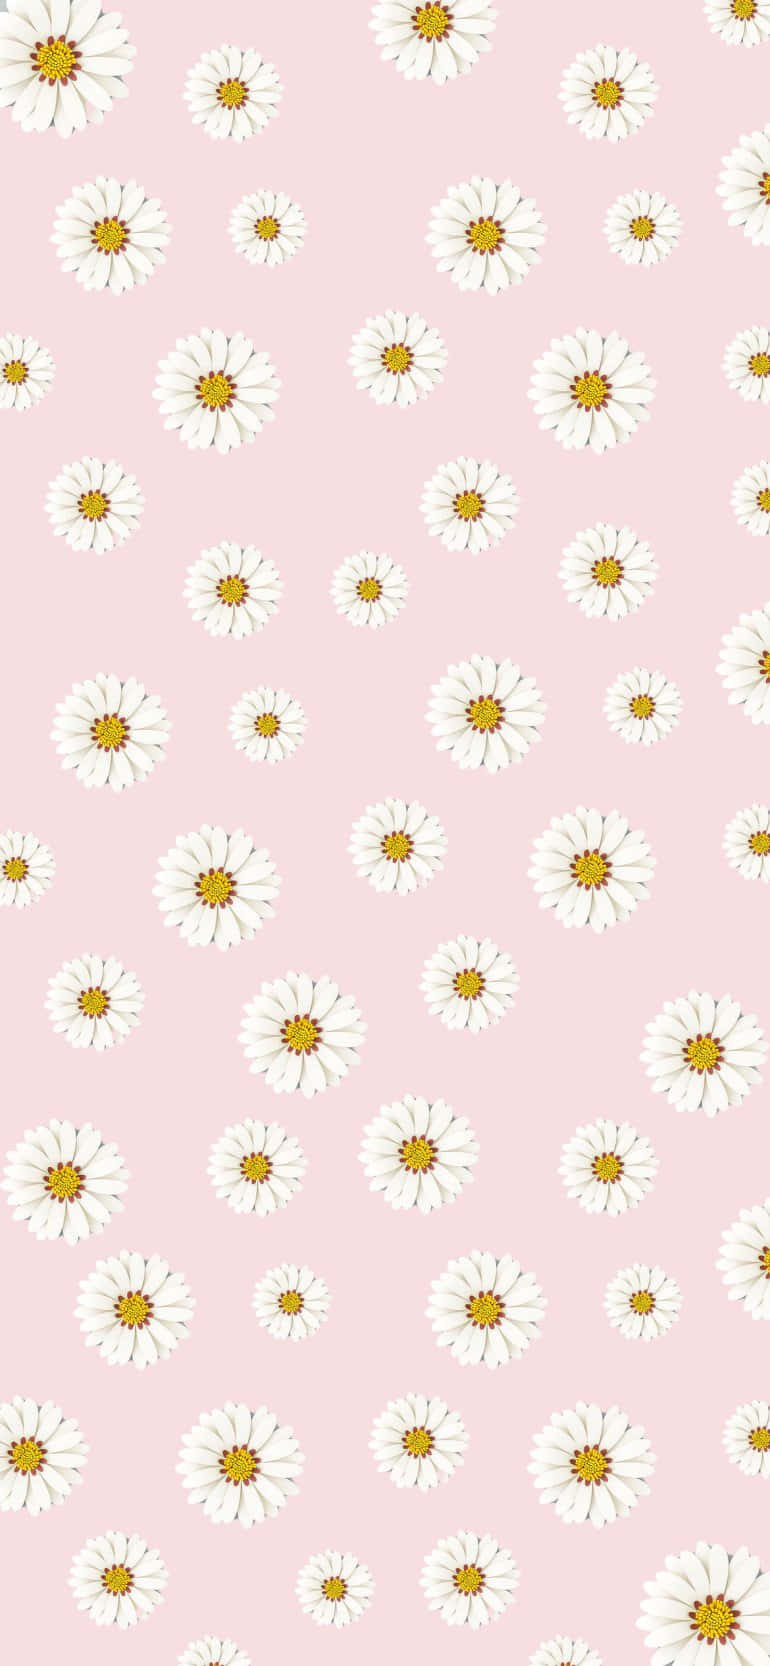 Download Daisy Pattern Design Pink Aesthetic Background | Wallpapers.com